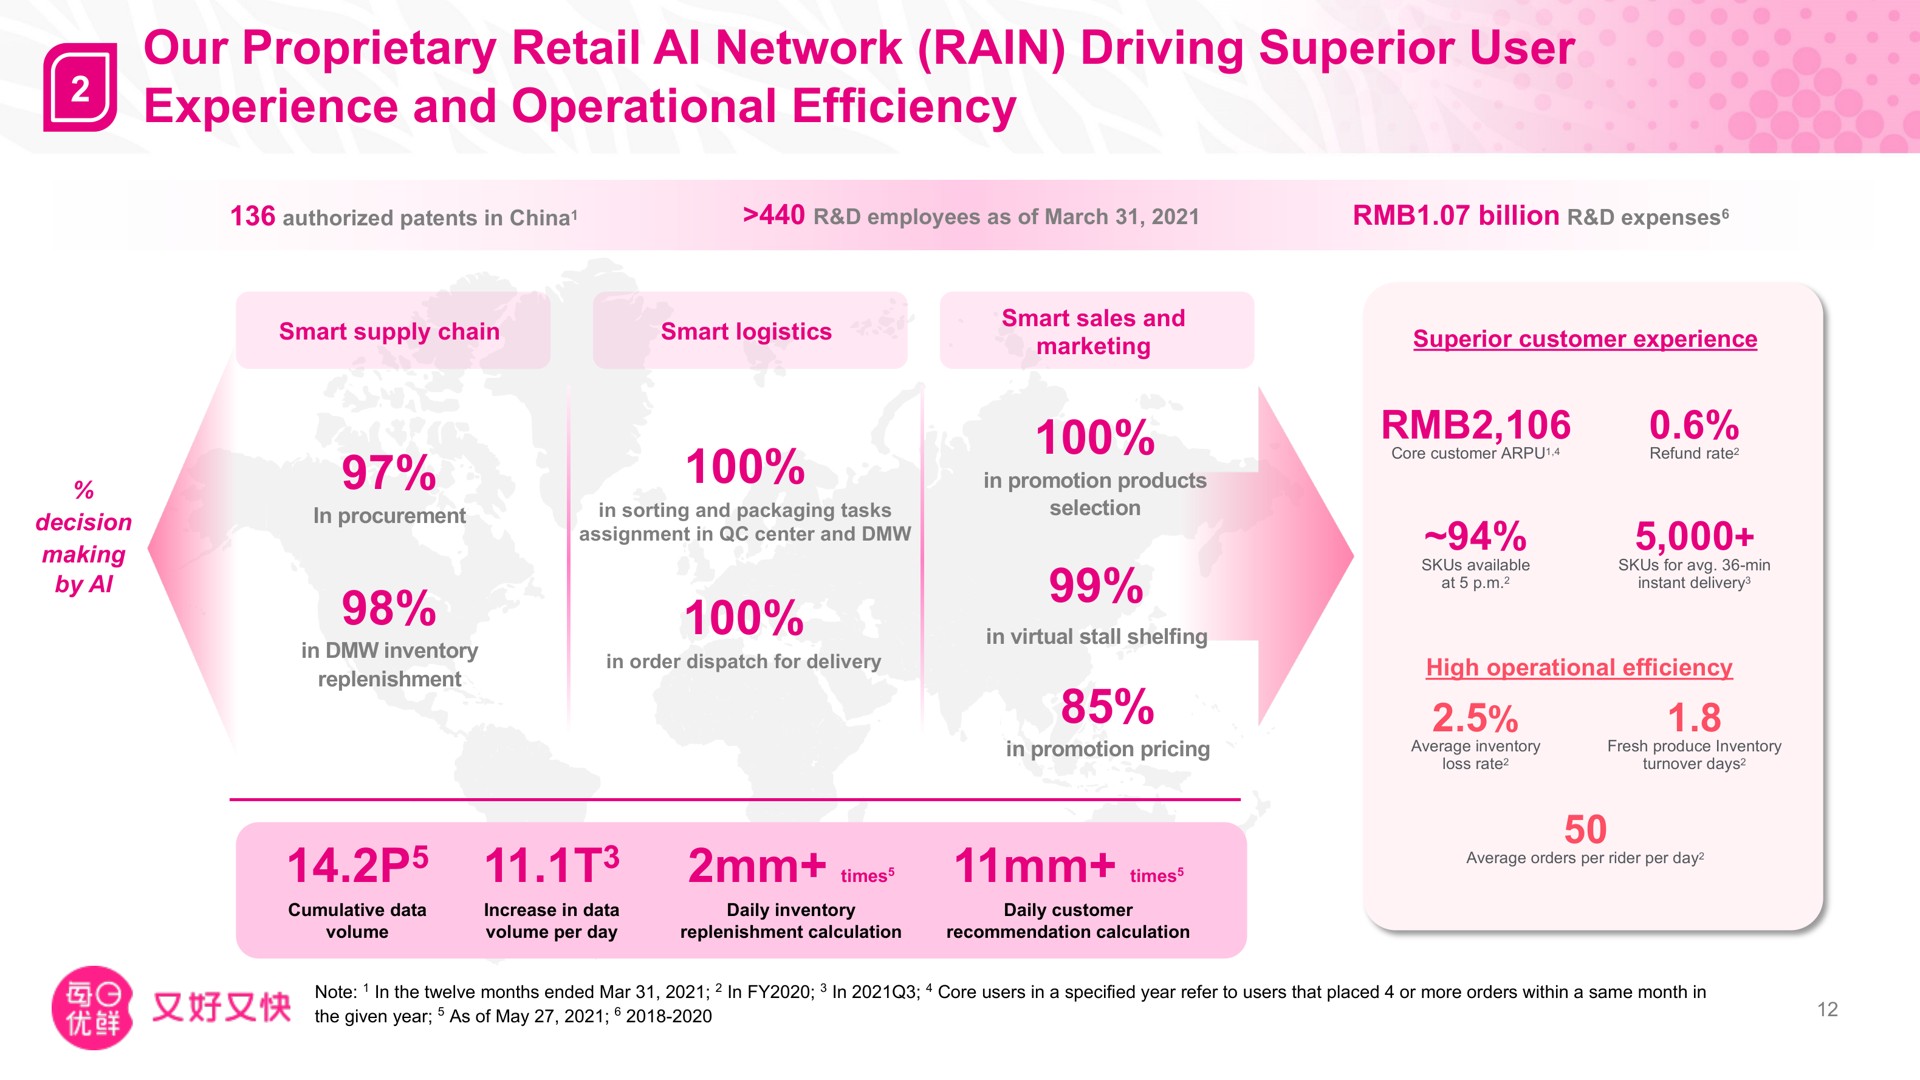 our proprietary retail network rain driving superior user experience and operational efficiency | Missfresh